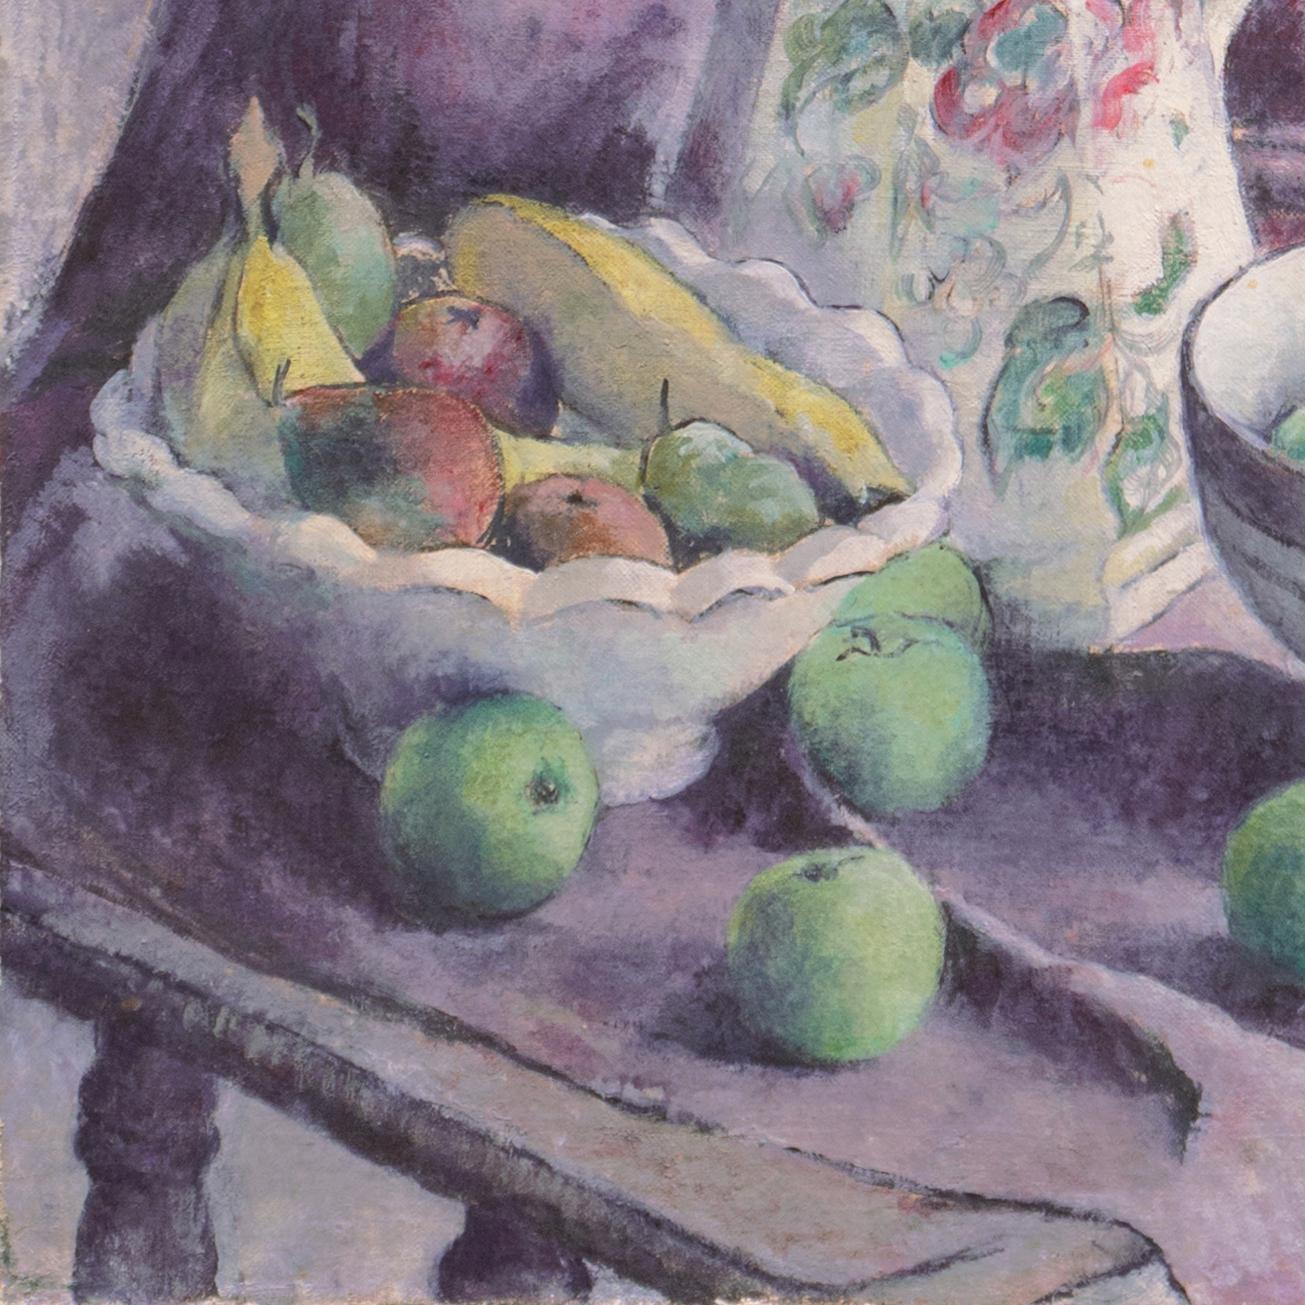 'Still Life of Fruit and a Creamware Jug', - Brown Still-Life Painting by Esther Lyne